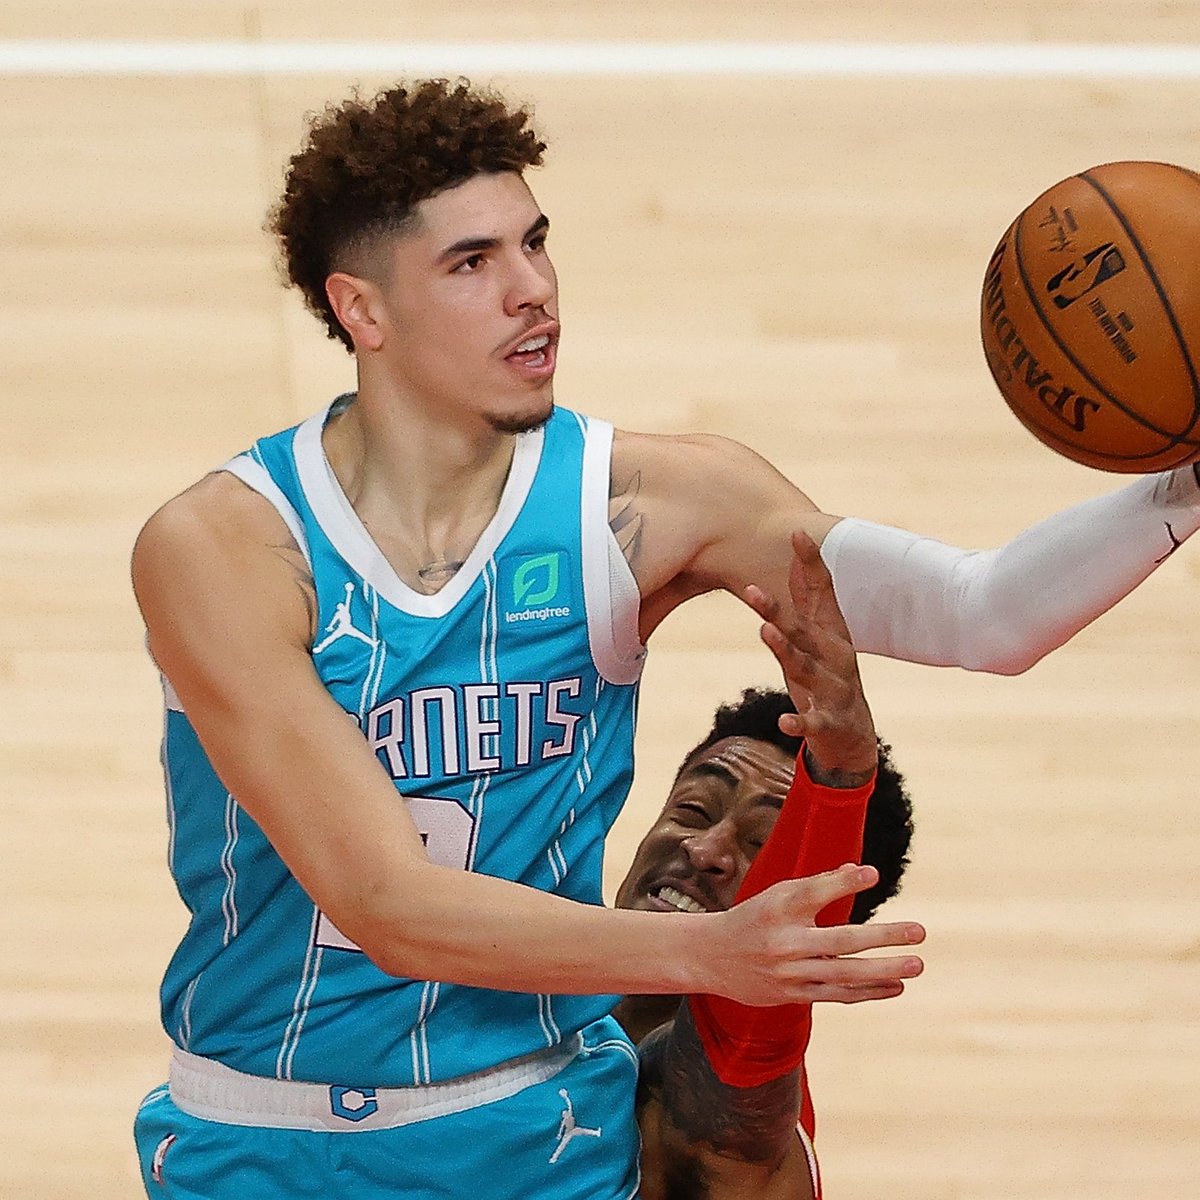 On Draft day, LaMelo Ball (No. 3 in 2020) and Lonzo Ball (No. 2 in 2017)